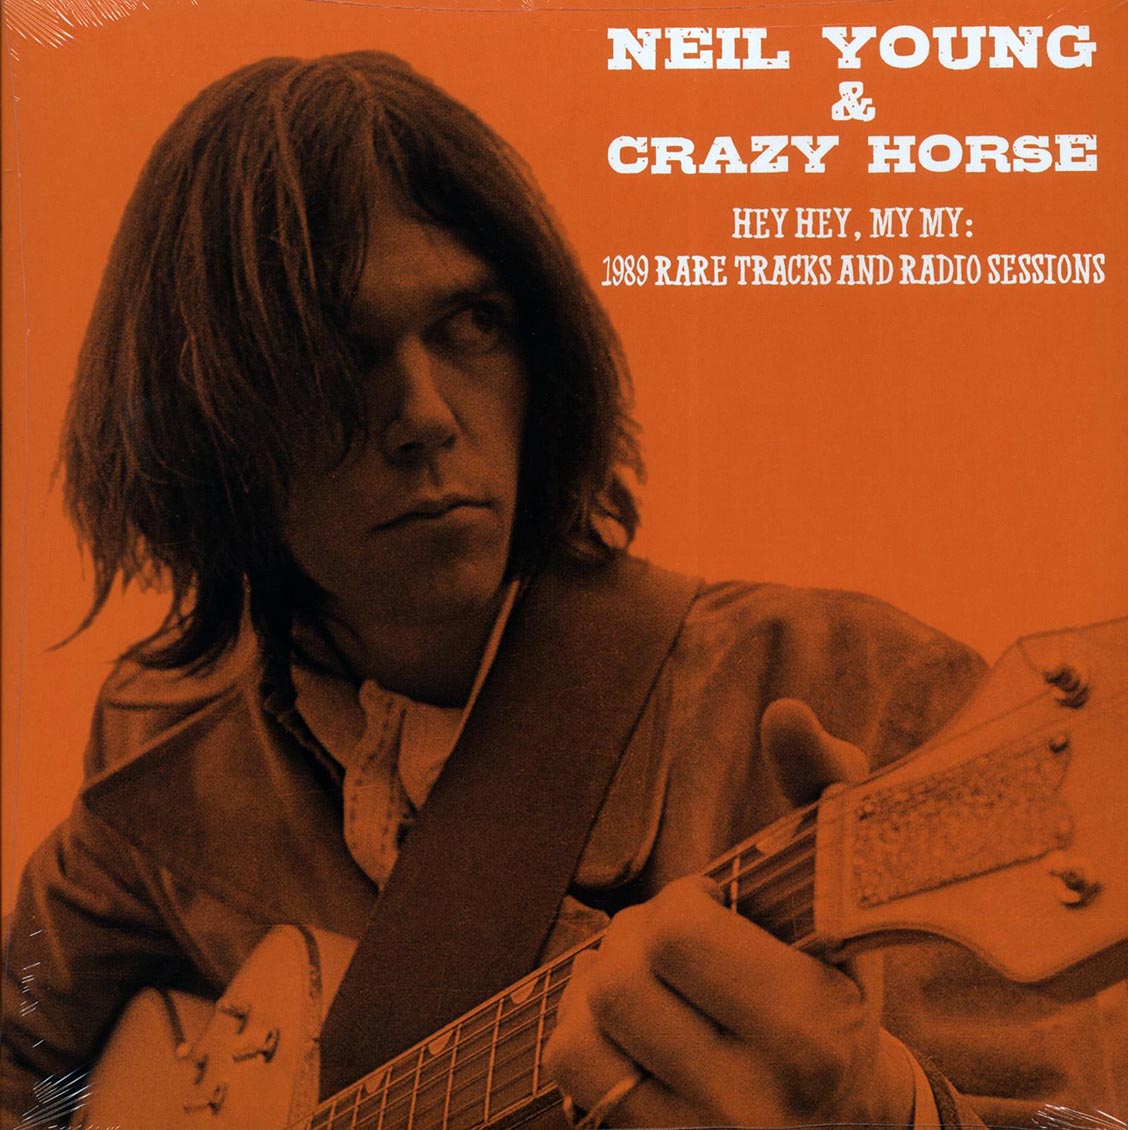 Neil Young & Crazy Horse - Hey Hey, My My: 1989 Rare Tracks And Radio Sessions - Vinyl LP